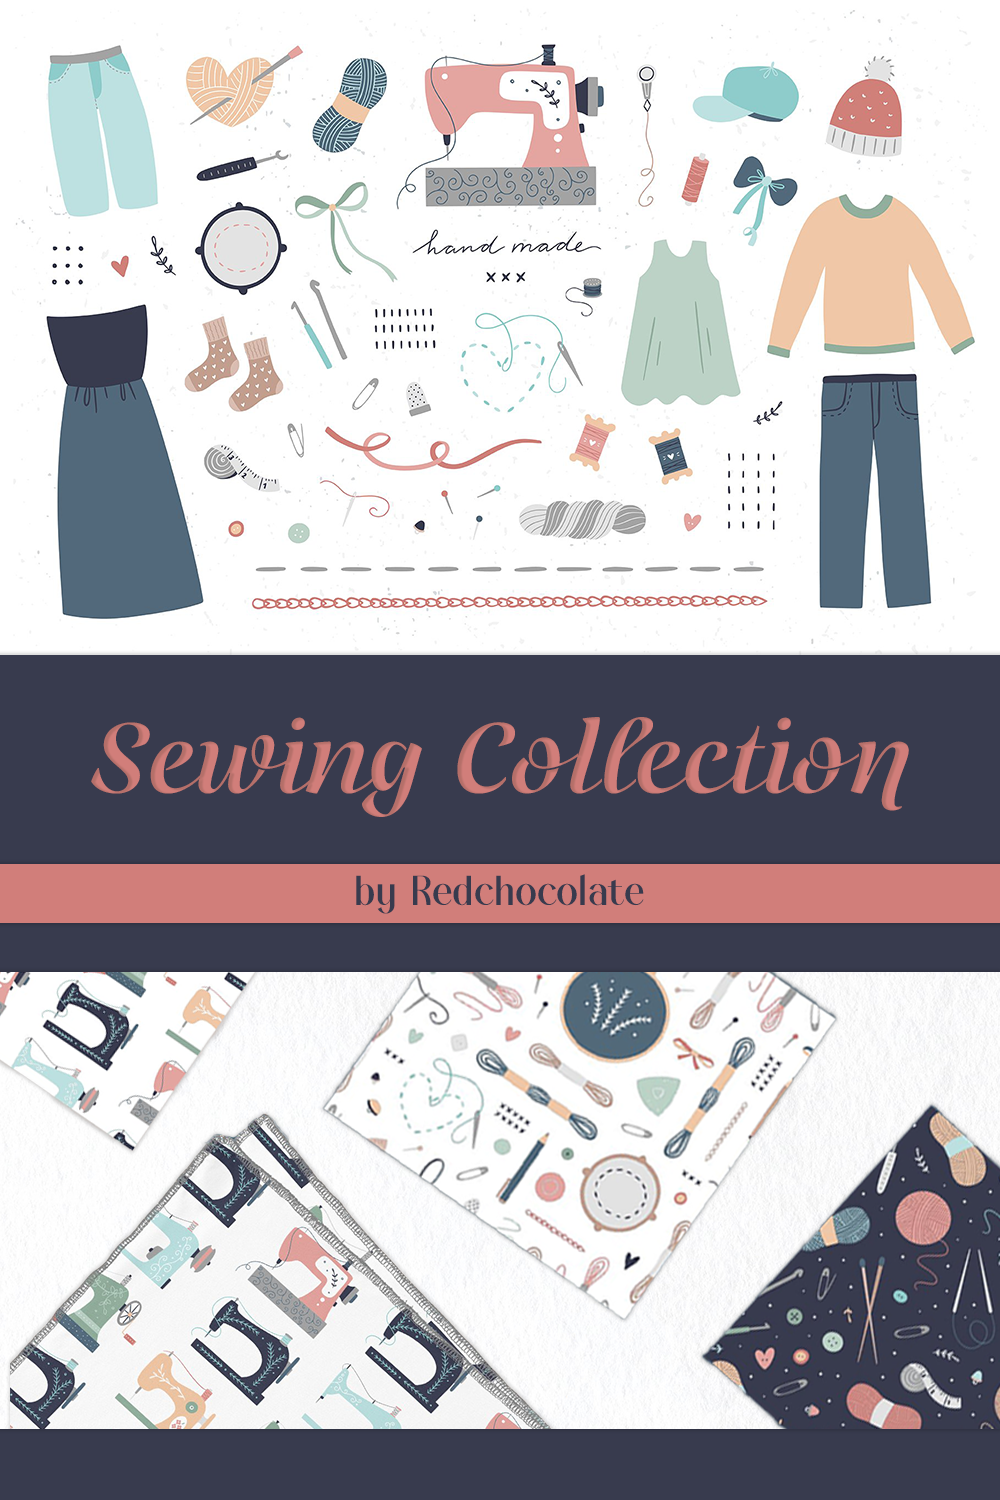 Sewing collection of pinterest.